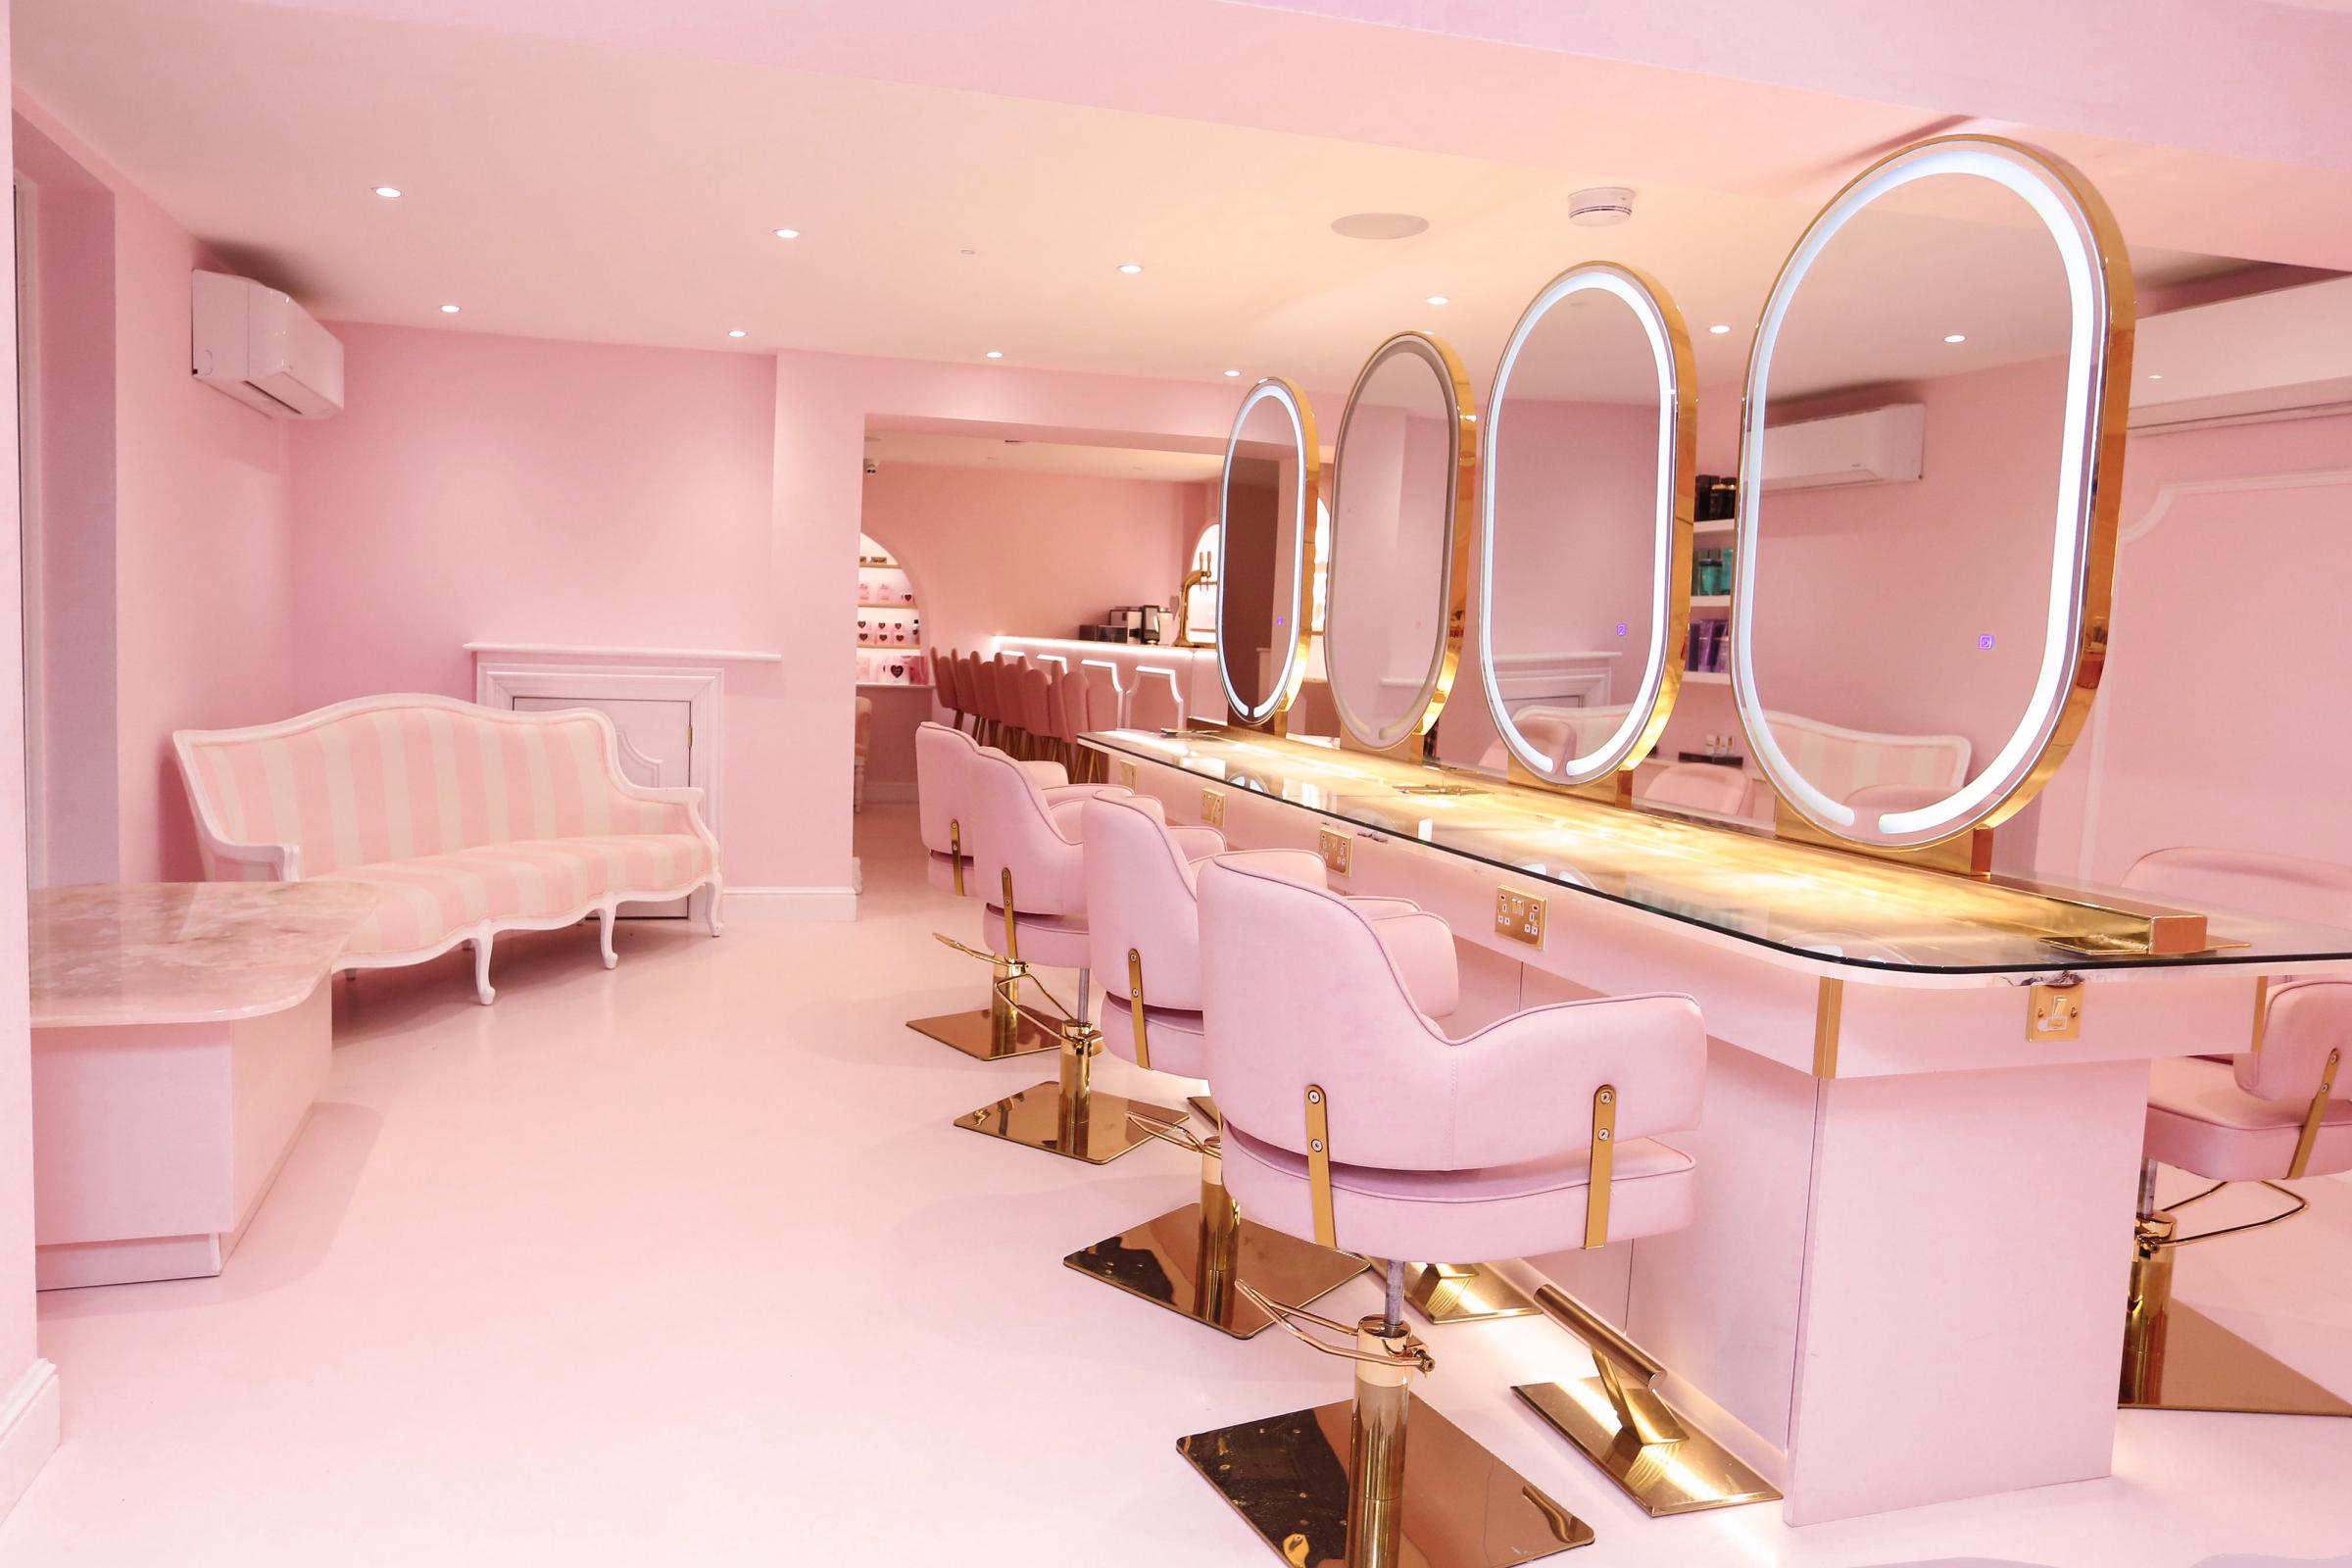 The Doll Beauty HQ salon in Boughton, Chester.